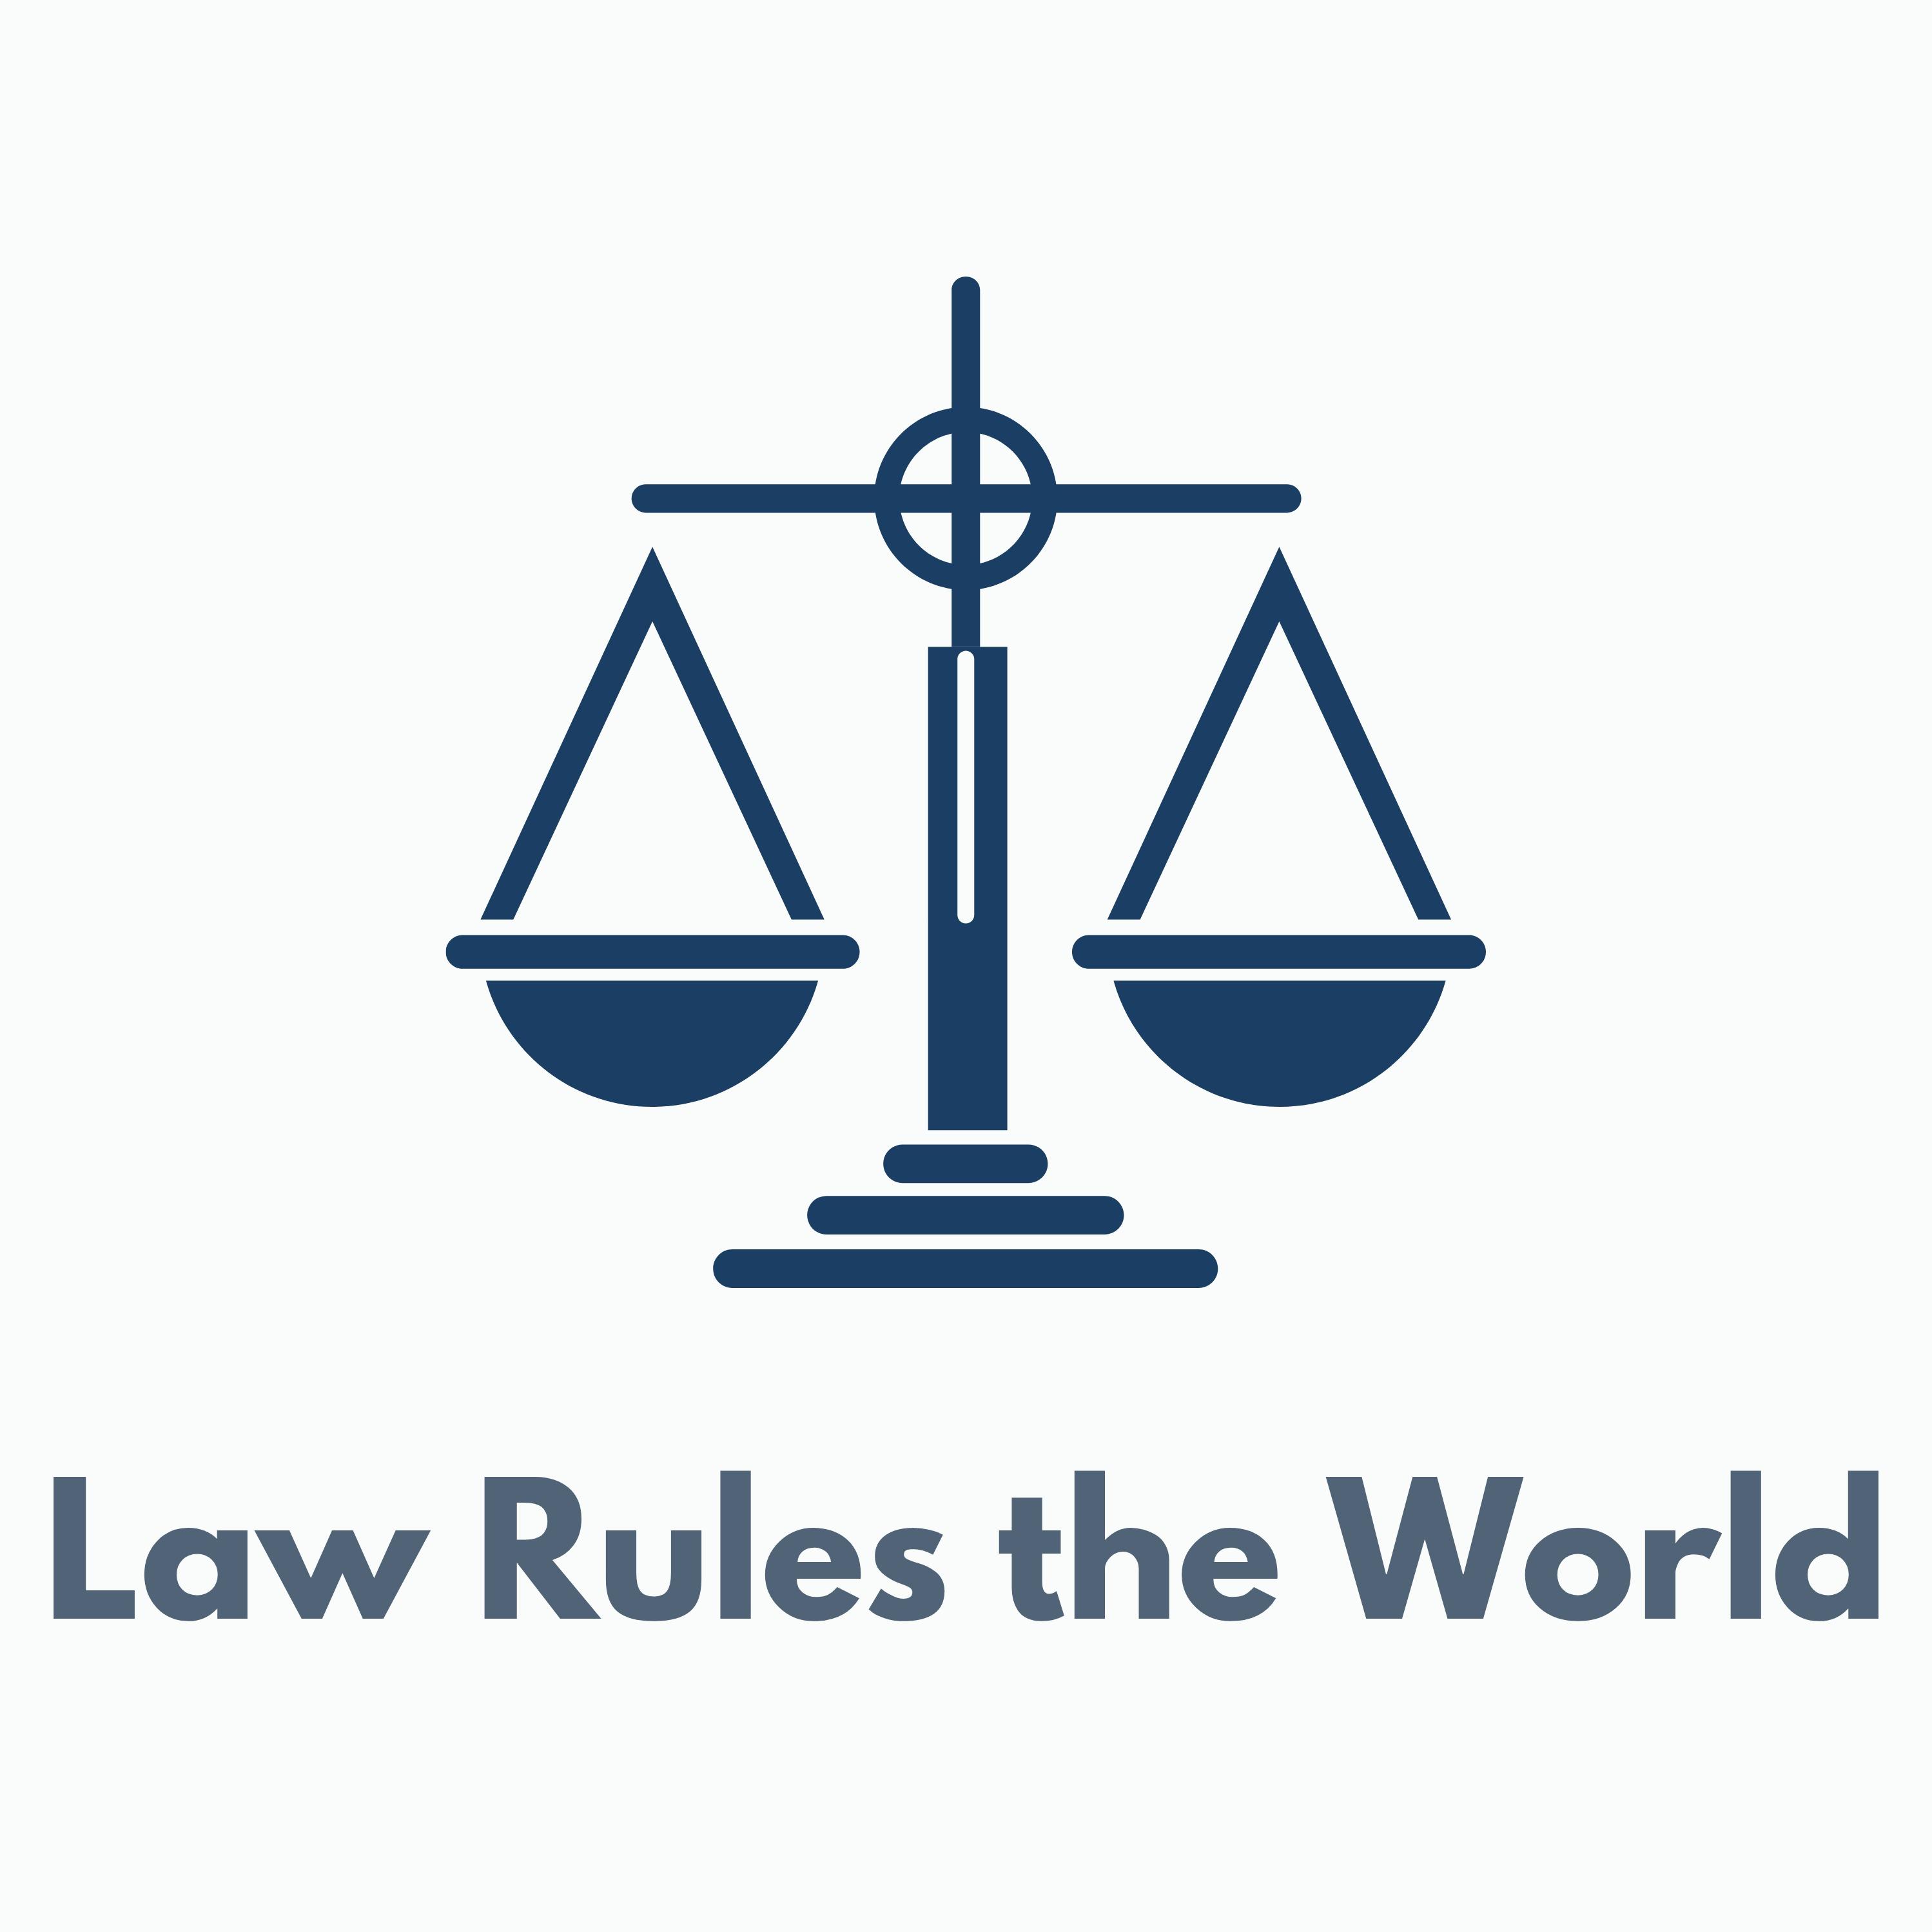 Law Rules the World